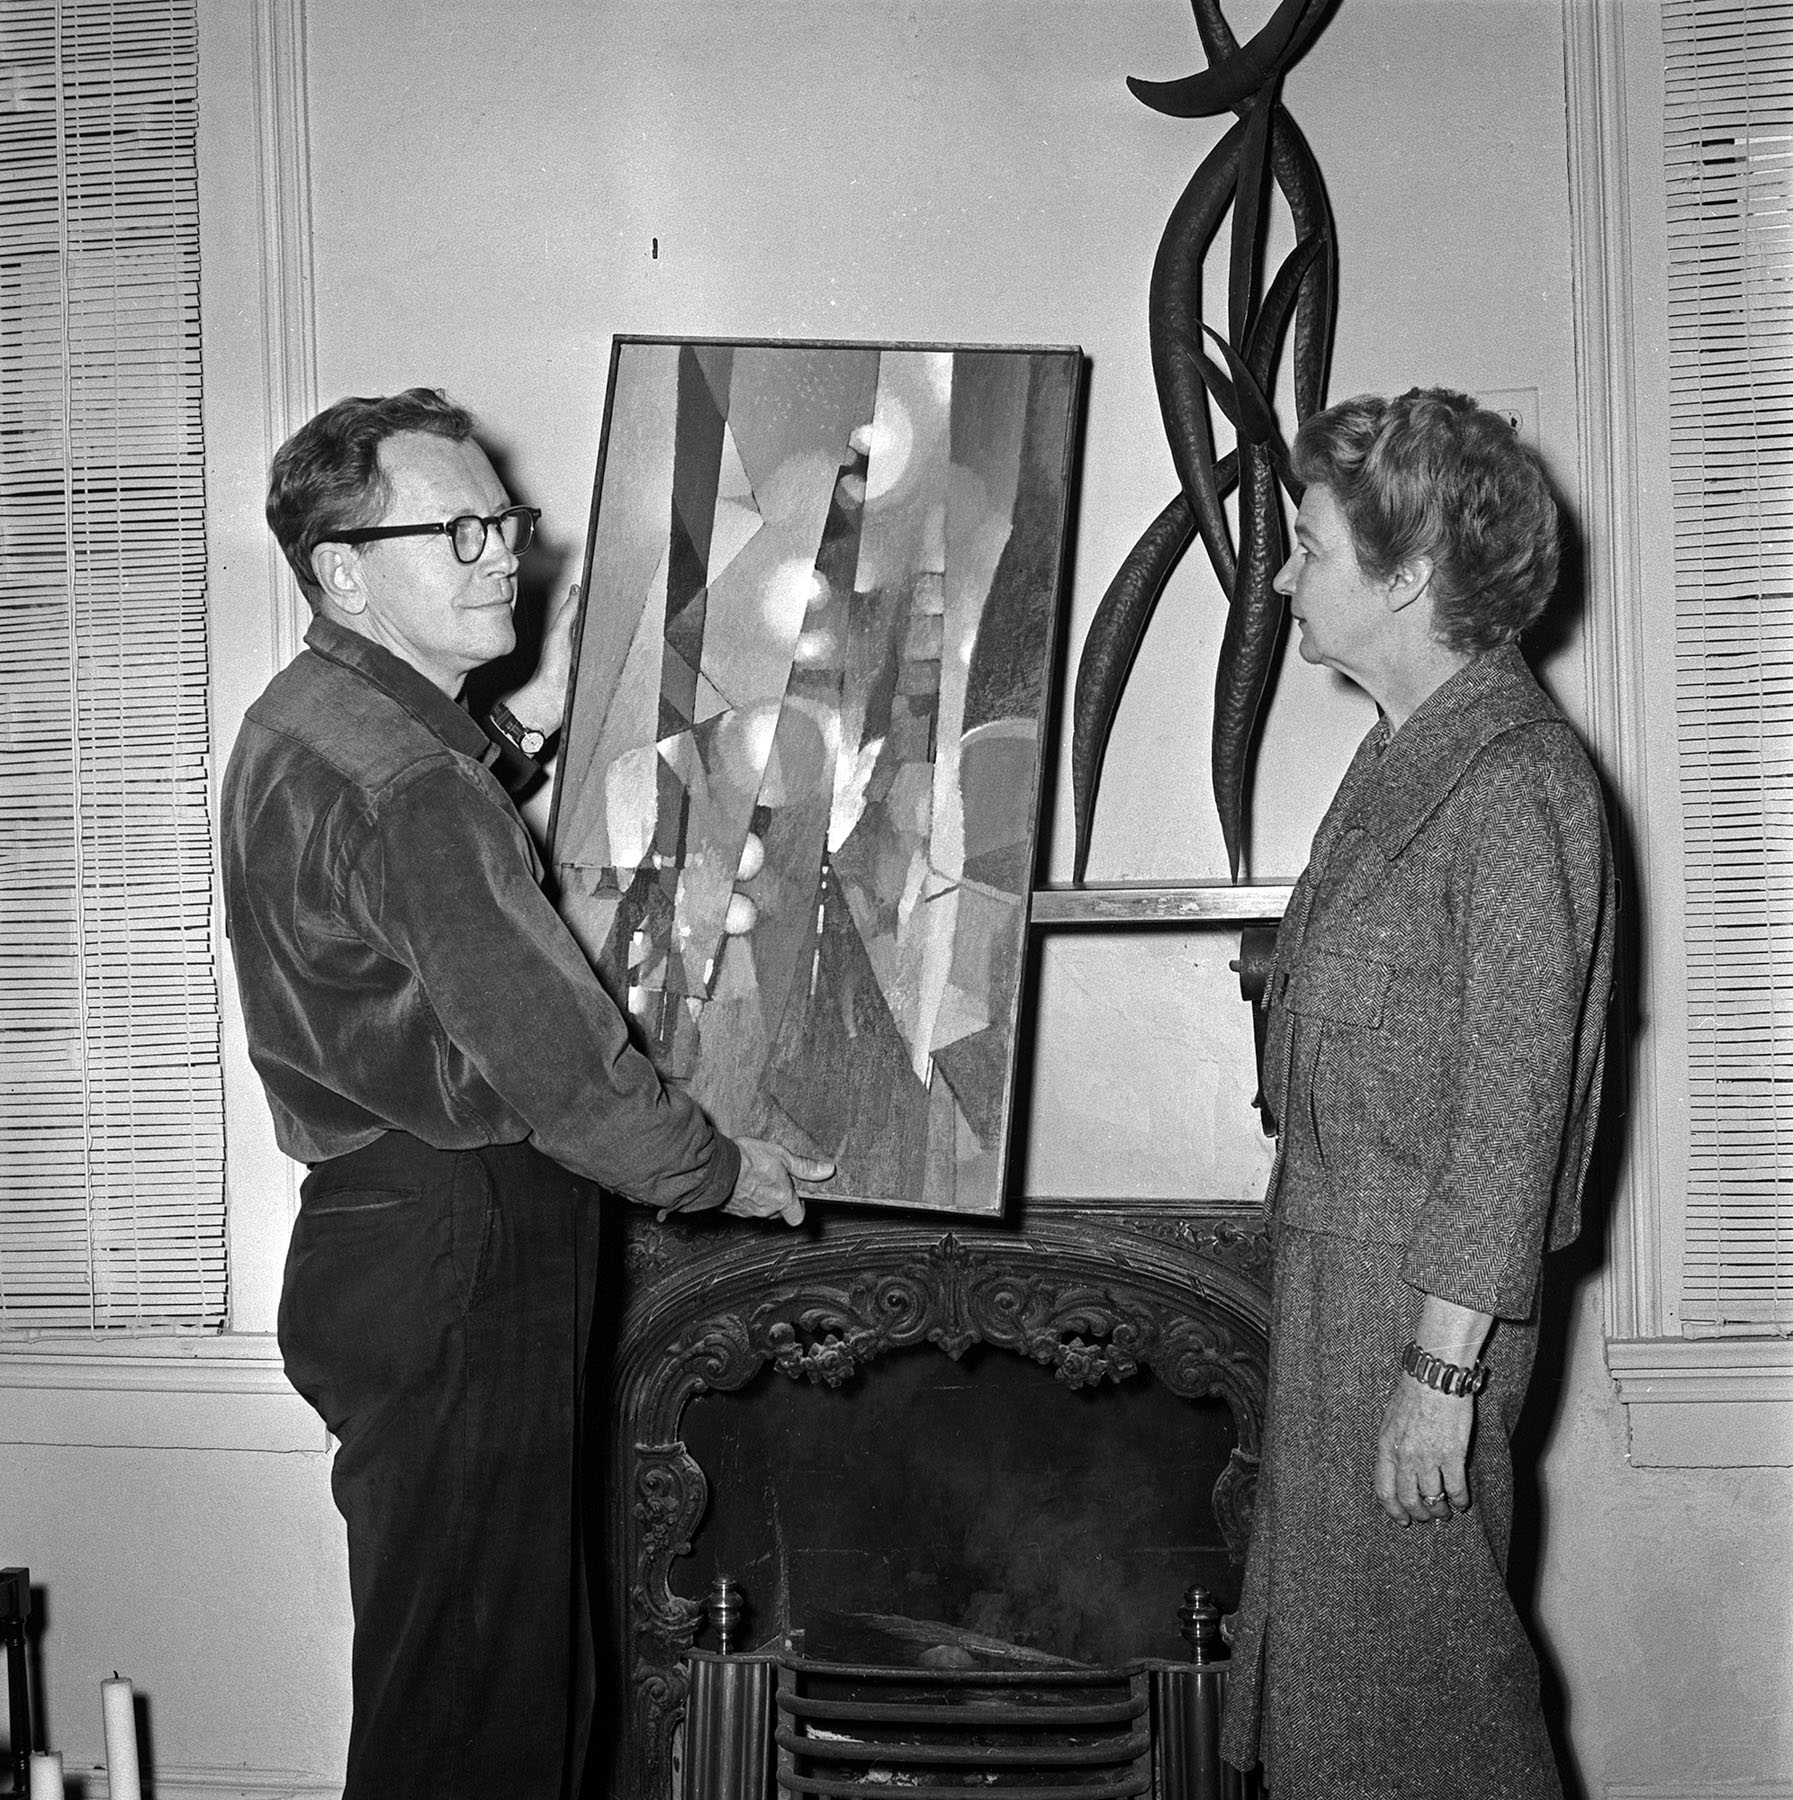 Black-and-white photo of a man holding a painting and a woman standing next to a sculpture on a mantel.